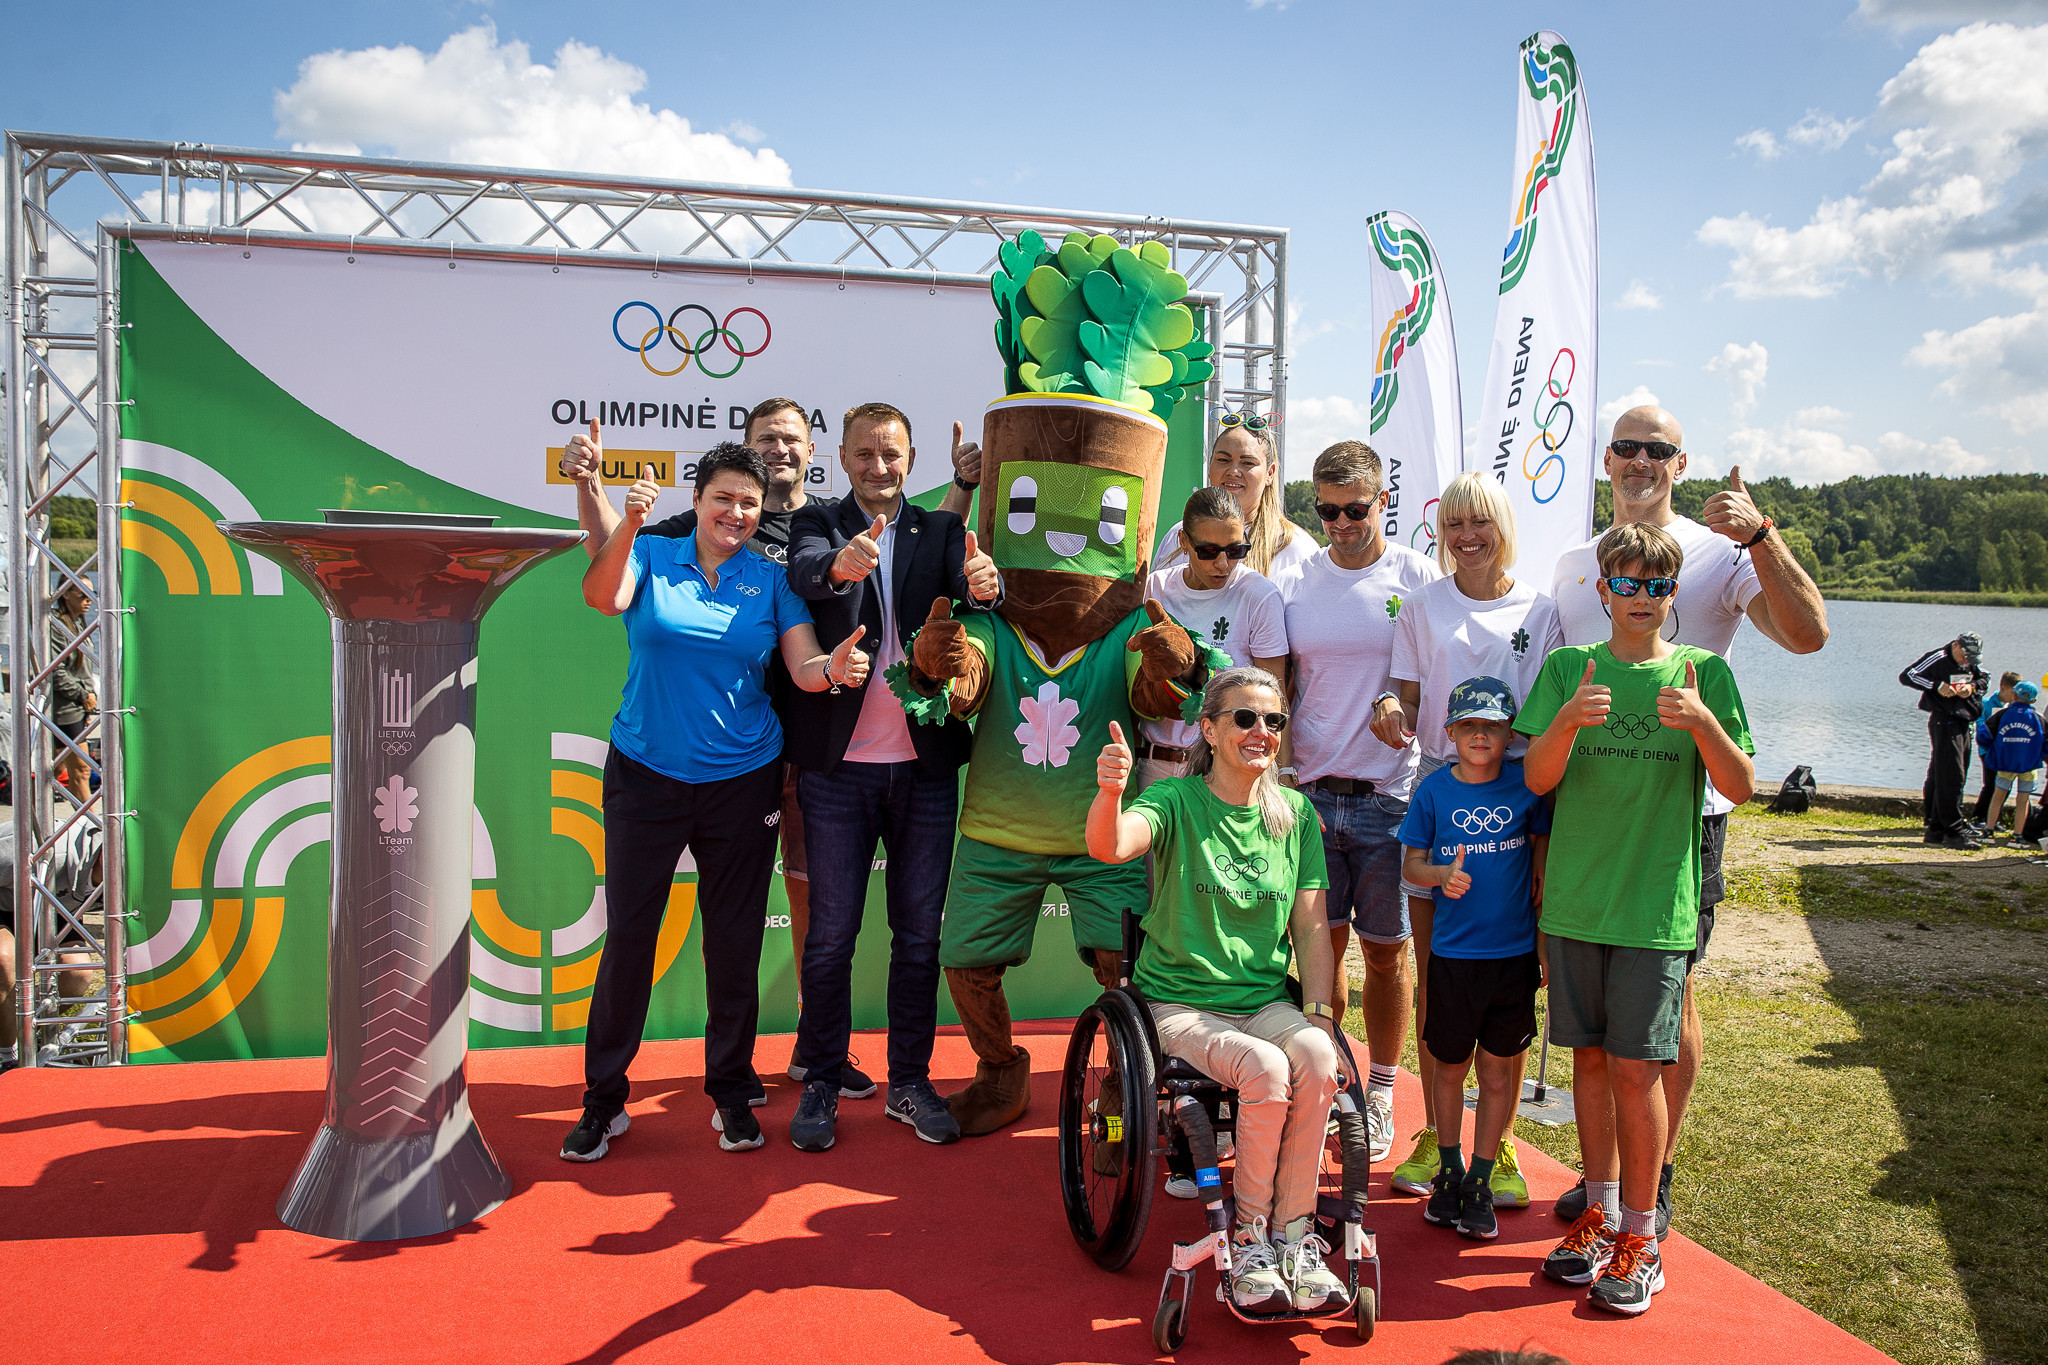 Lithuania celebrated a special Olympic Day which marked its 100th anniversary of Olympic participation. LNOC